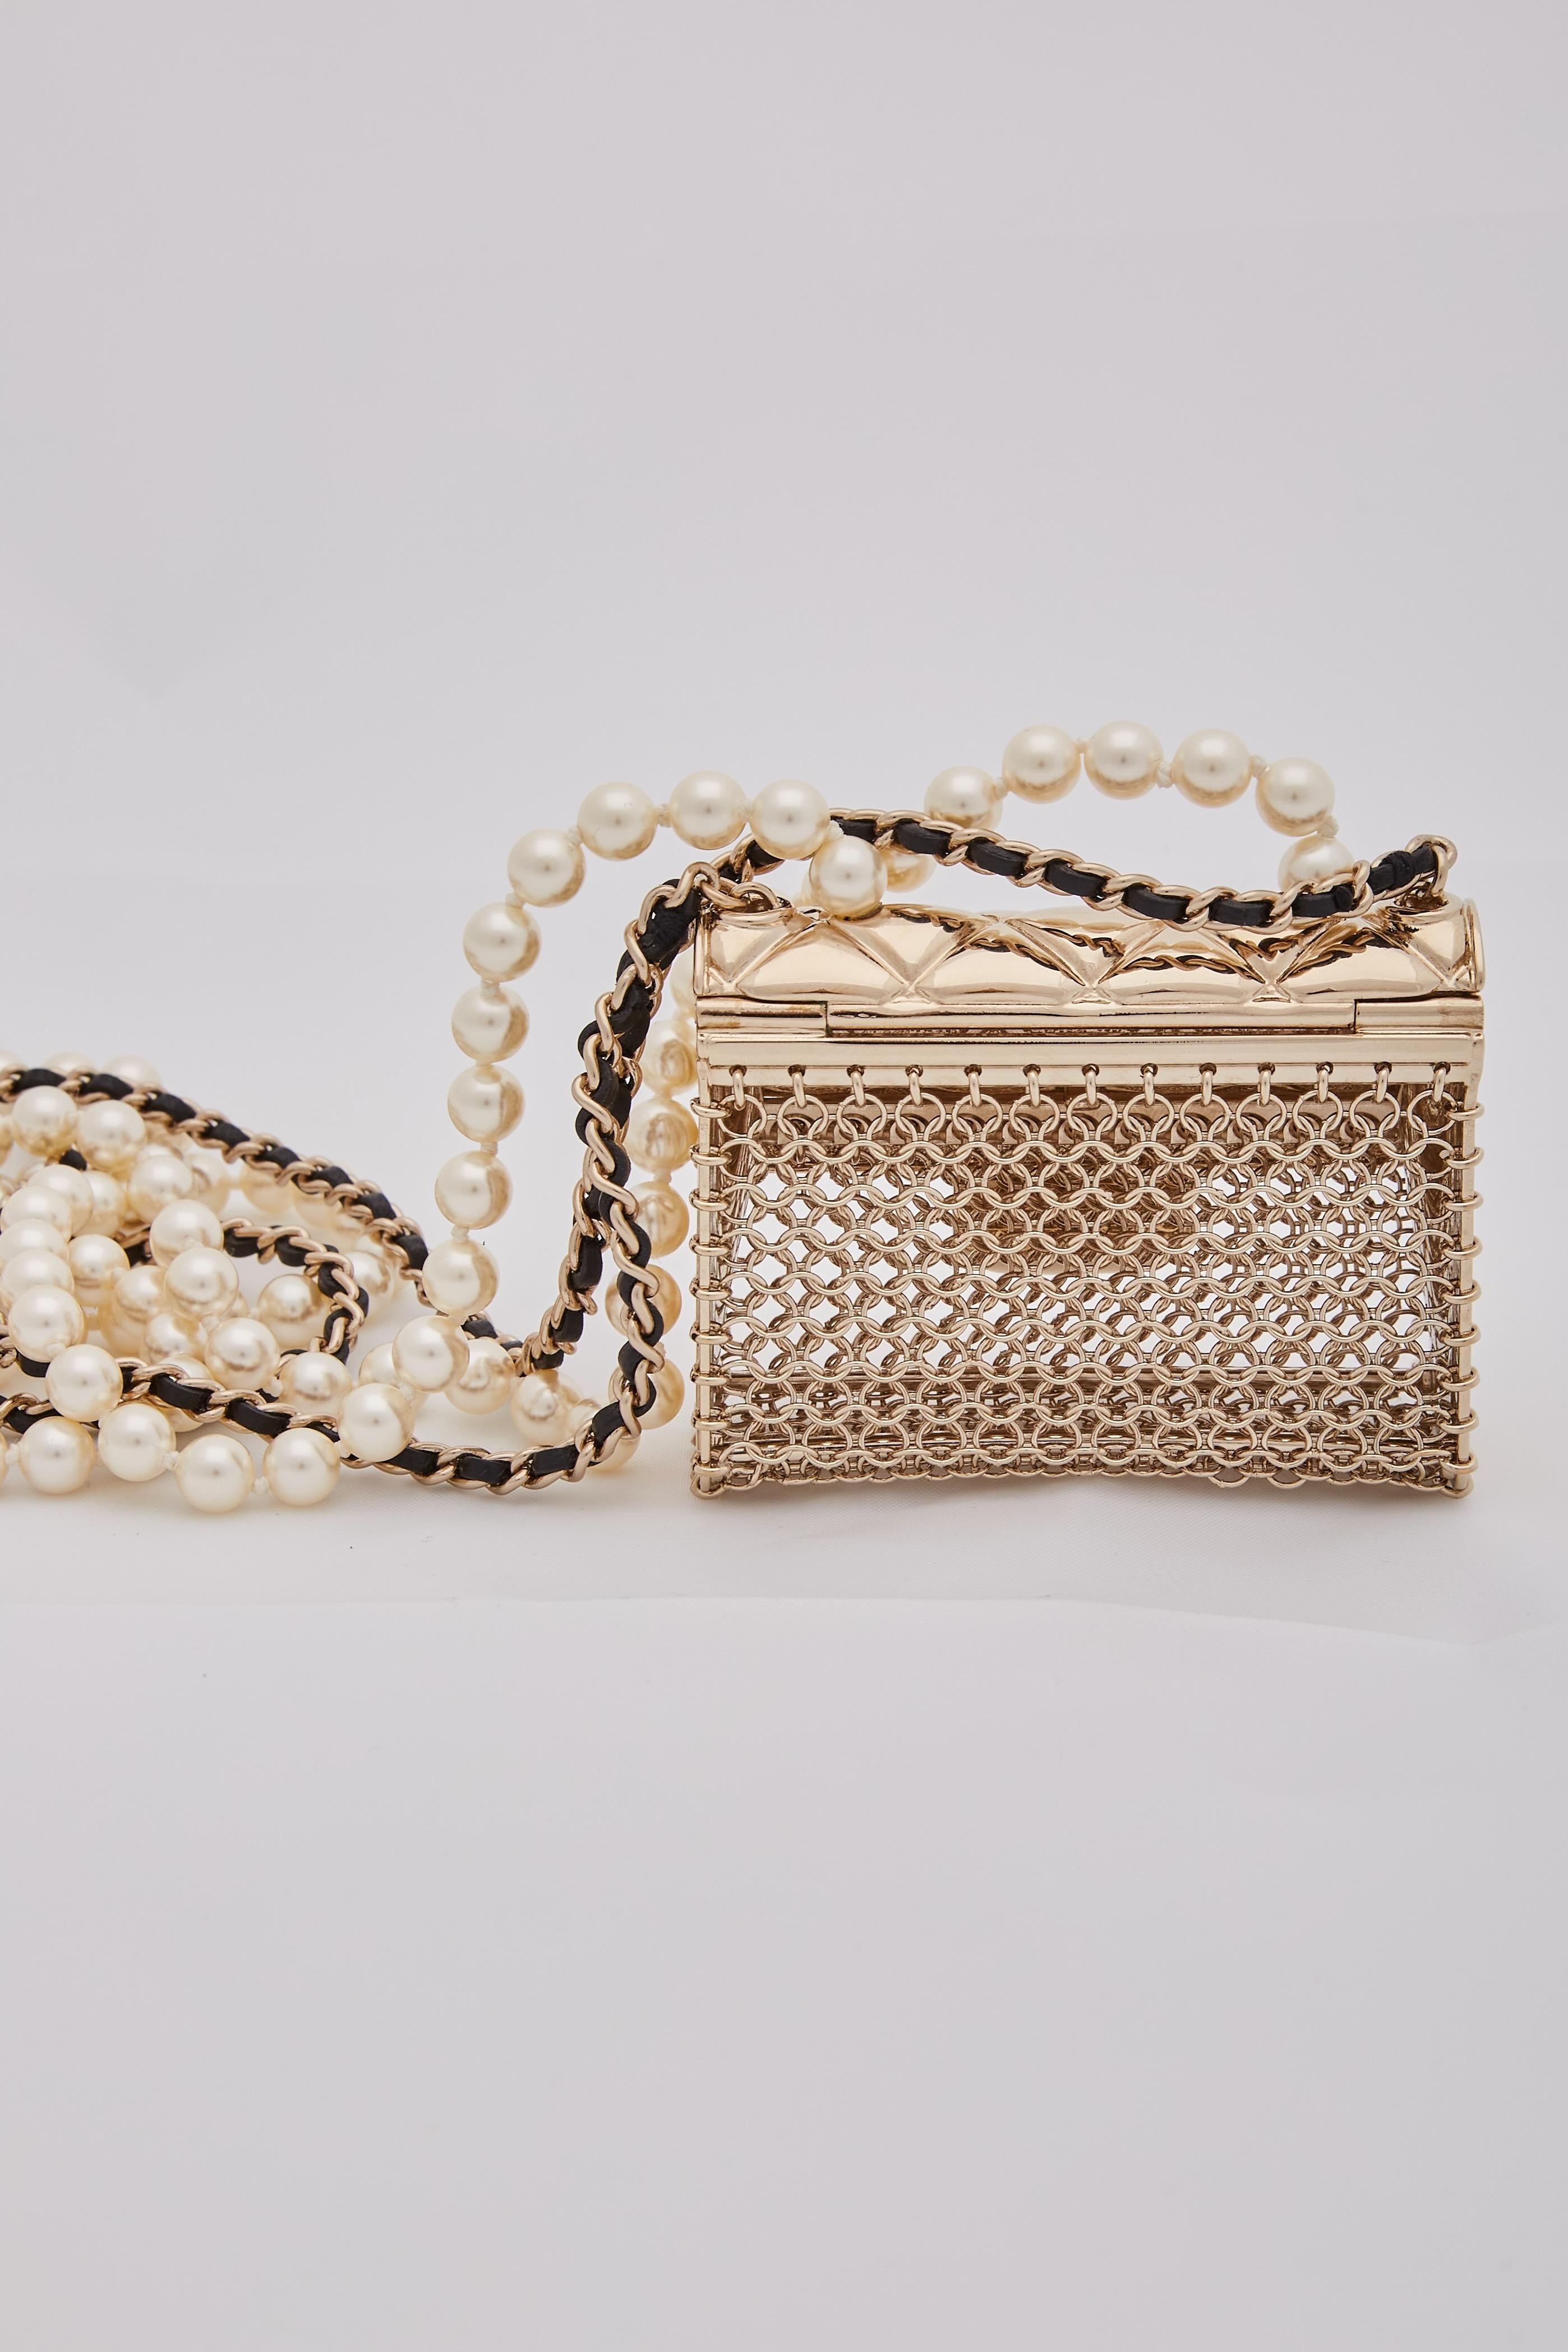 CHANEL GOLD MICRO FLAP BAG PENDANT PEARLS LONG CROSSBODY NECKLACE

From the Summer 2021 Collection by Virginie Viard, this necklace features a striking 20-inch drop. Its centerpiece is a metal chain link micro flap bag pendant accented with